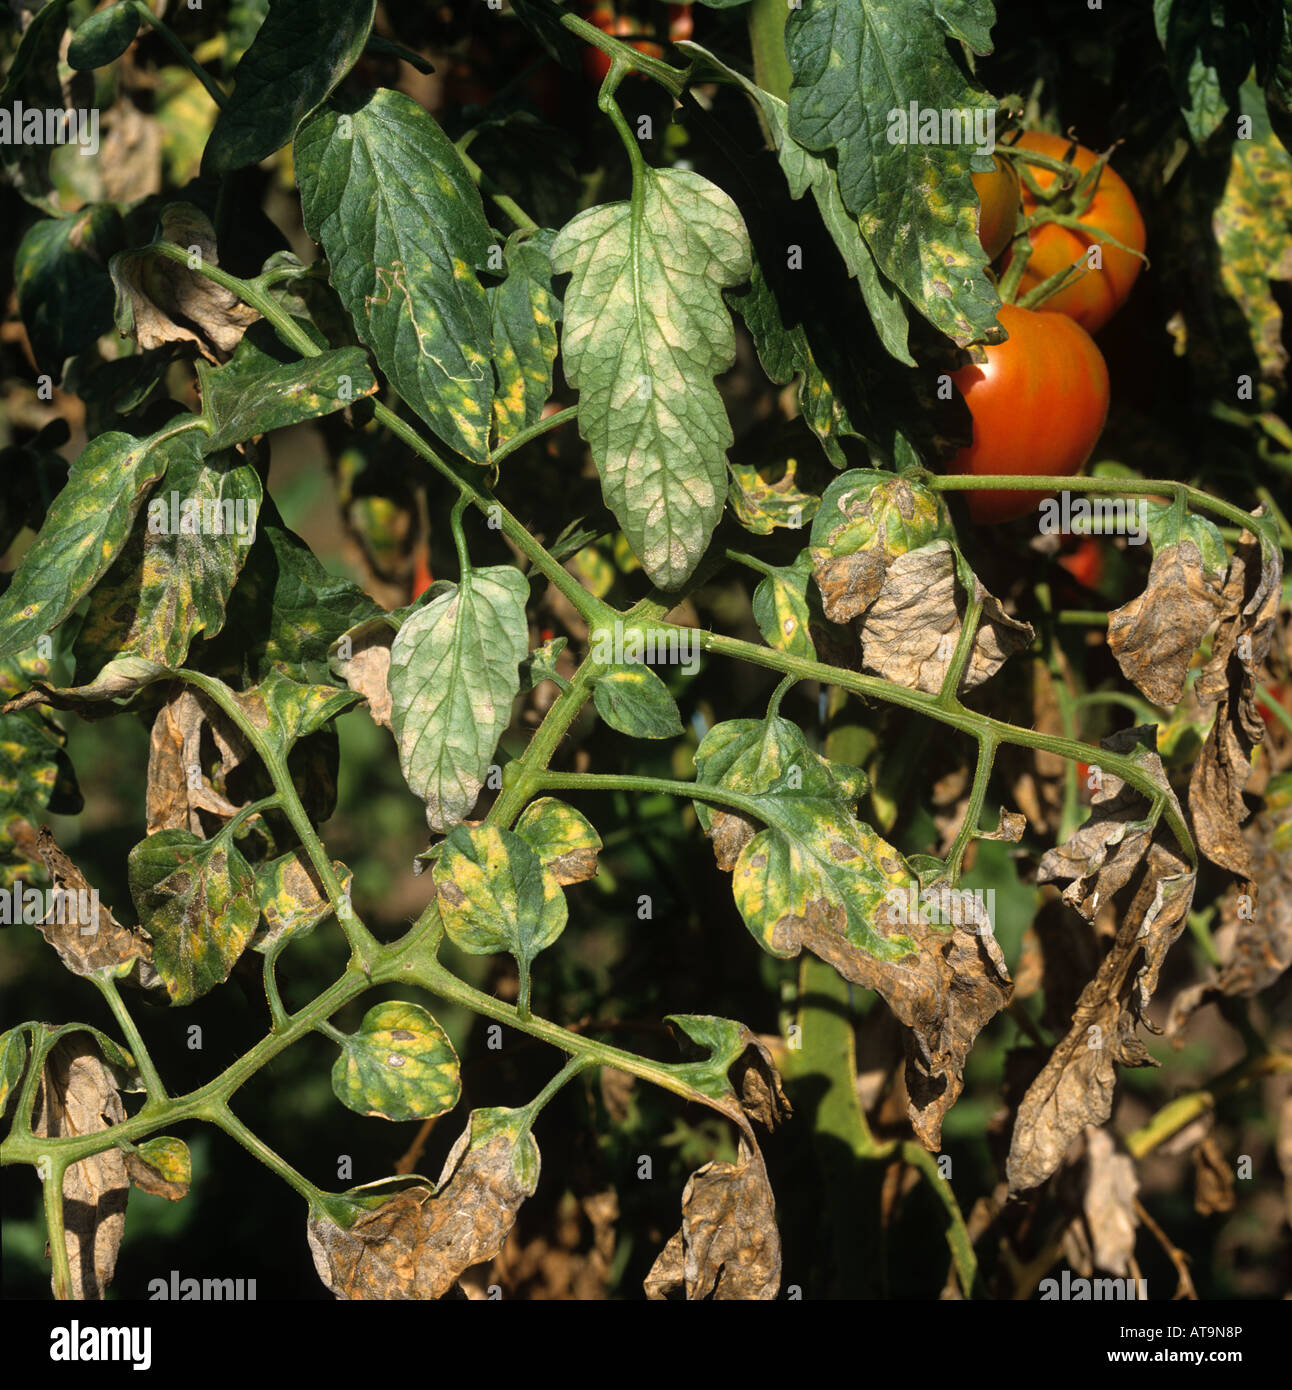 Powdery mildew Leveillula taurica infected tomato crop with damage on upper and lower surfaces Stock Photo